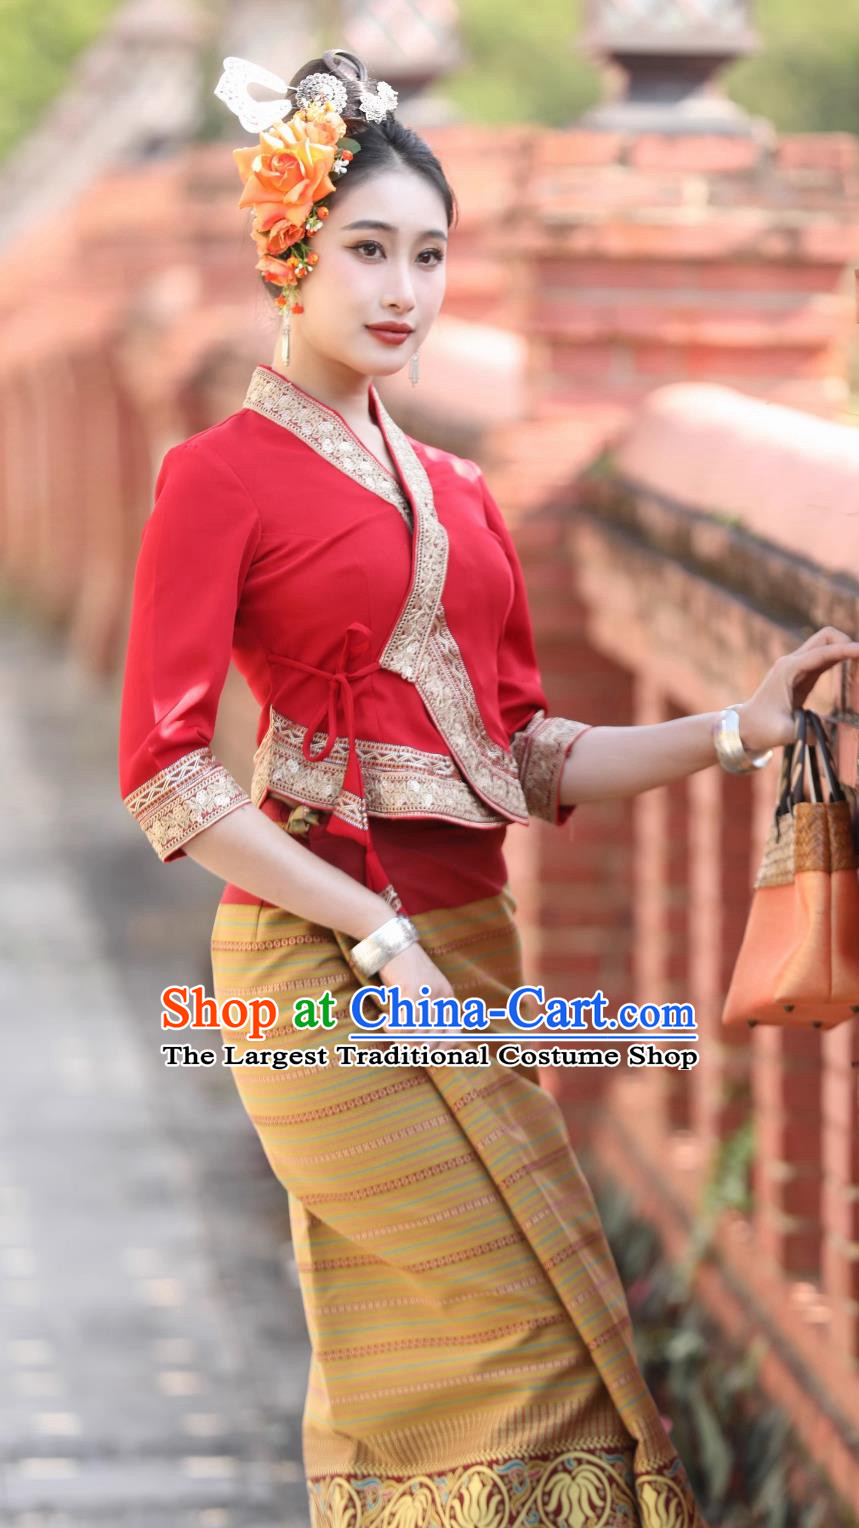 Dai Traditional Clothing Women Red Suit Mid Sleeve Skirt Festival Clothing